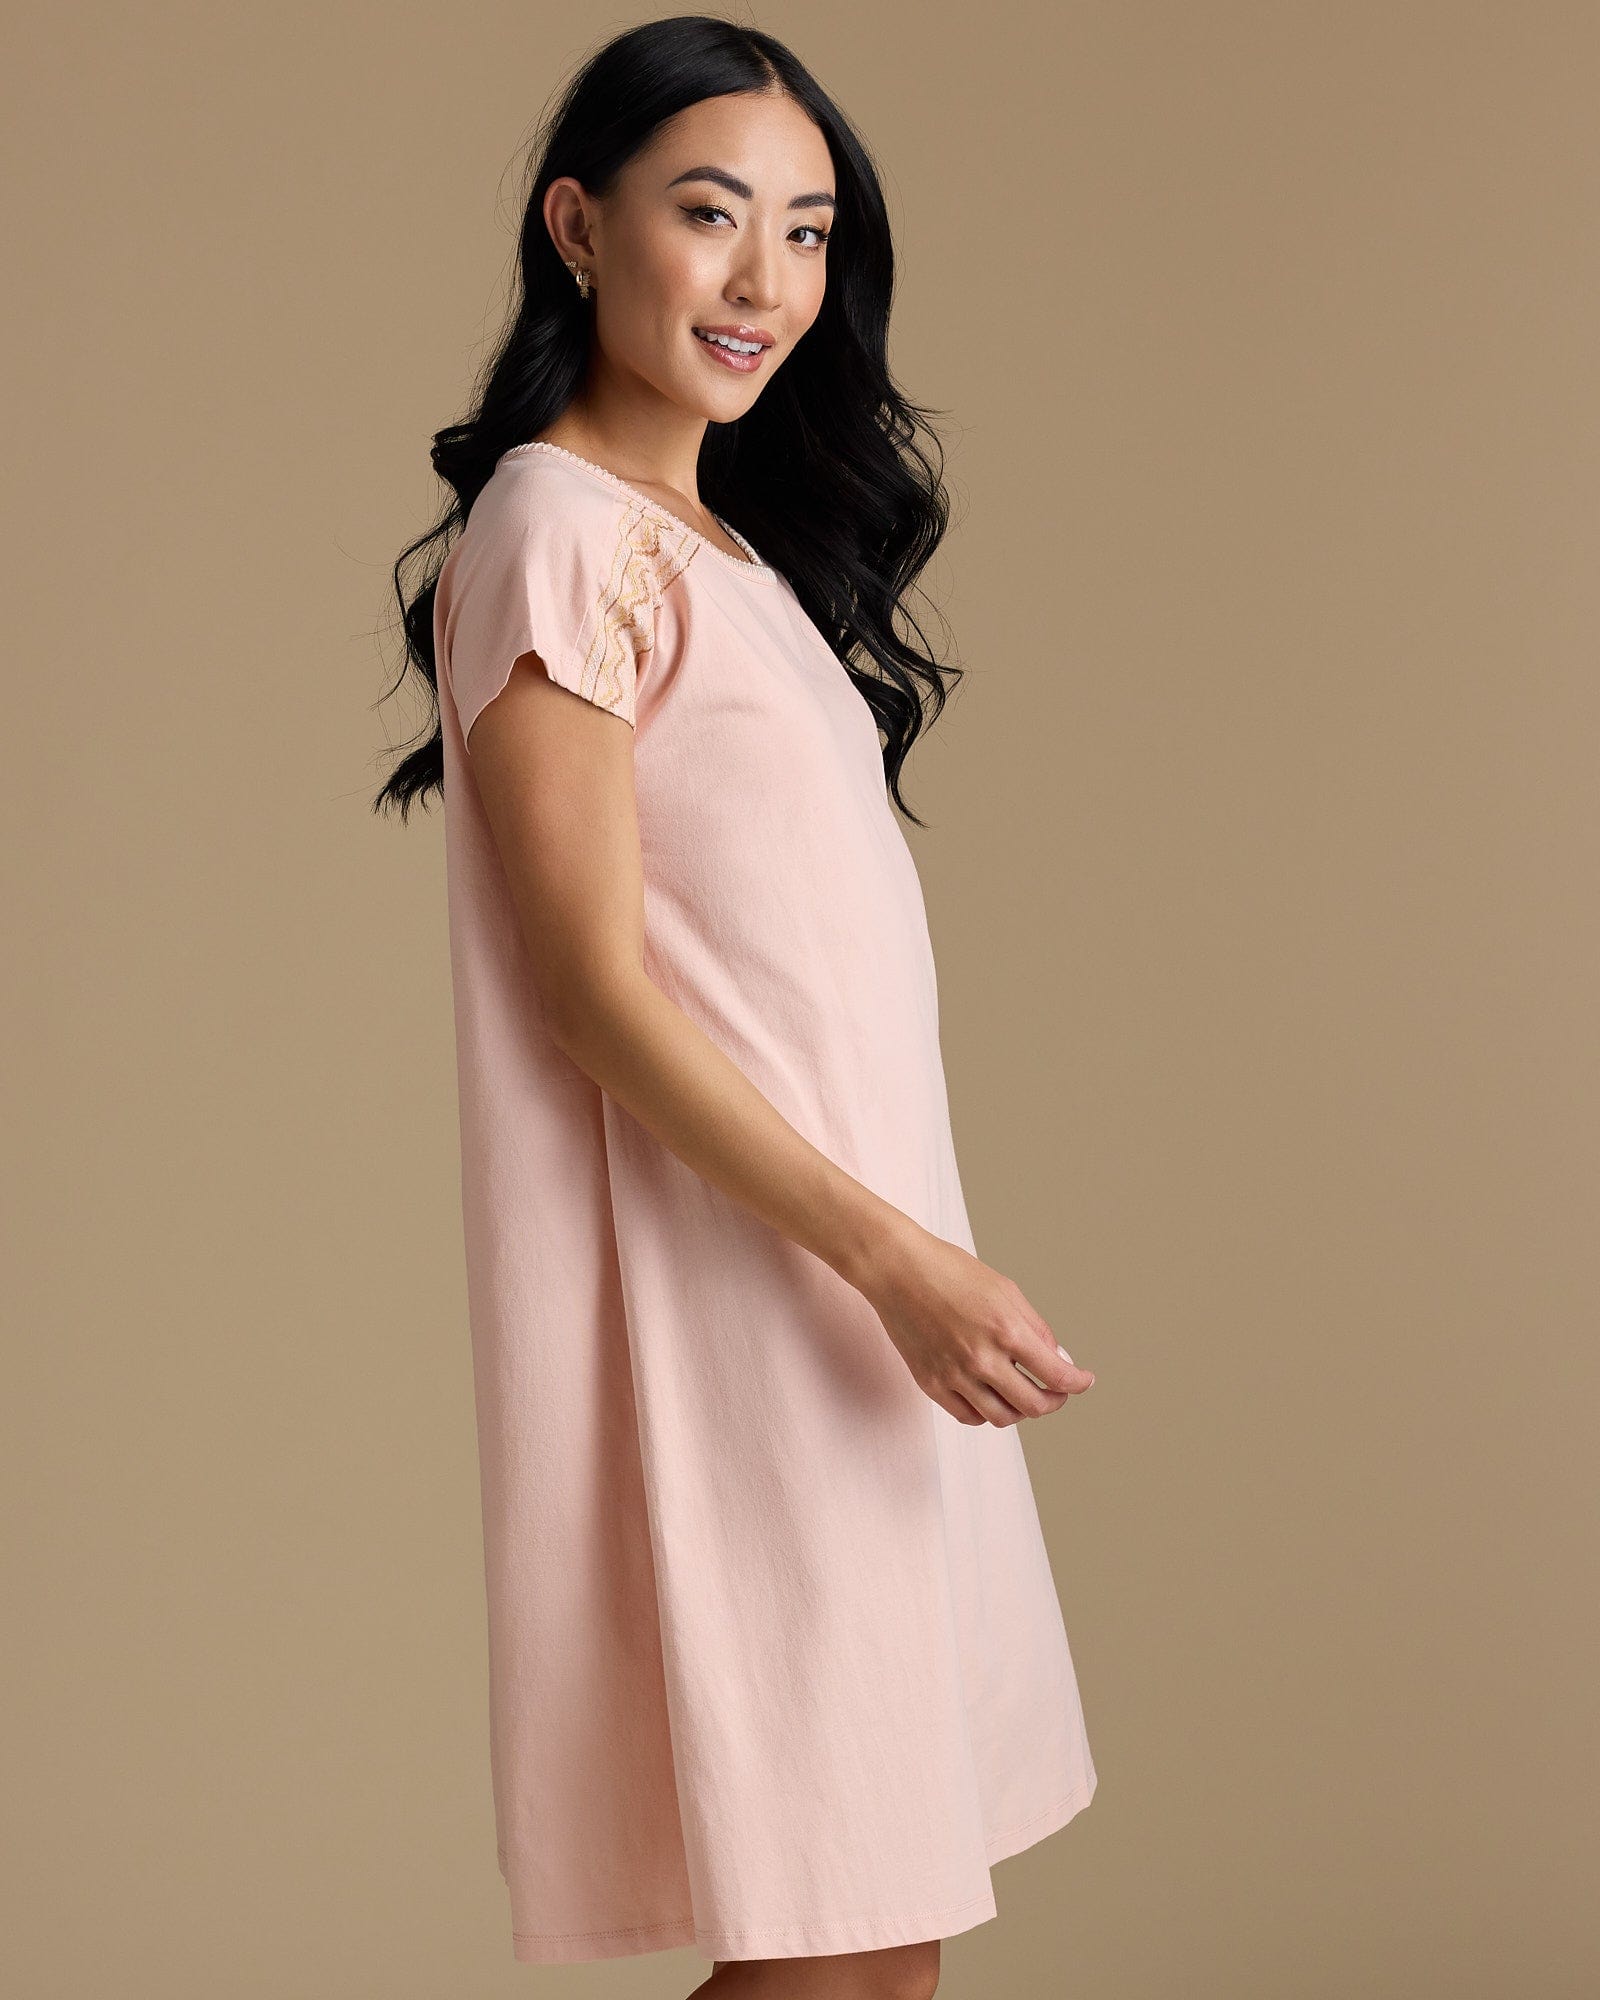 Woman with a short sleeve, knee-length pink dress with embroidery on shoulders